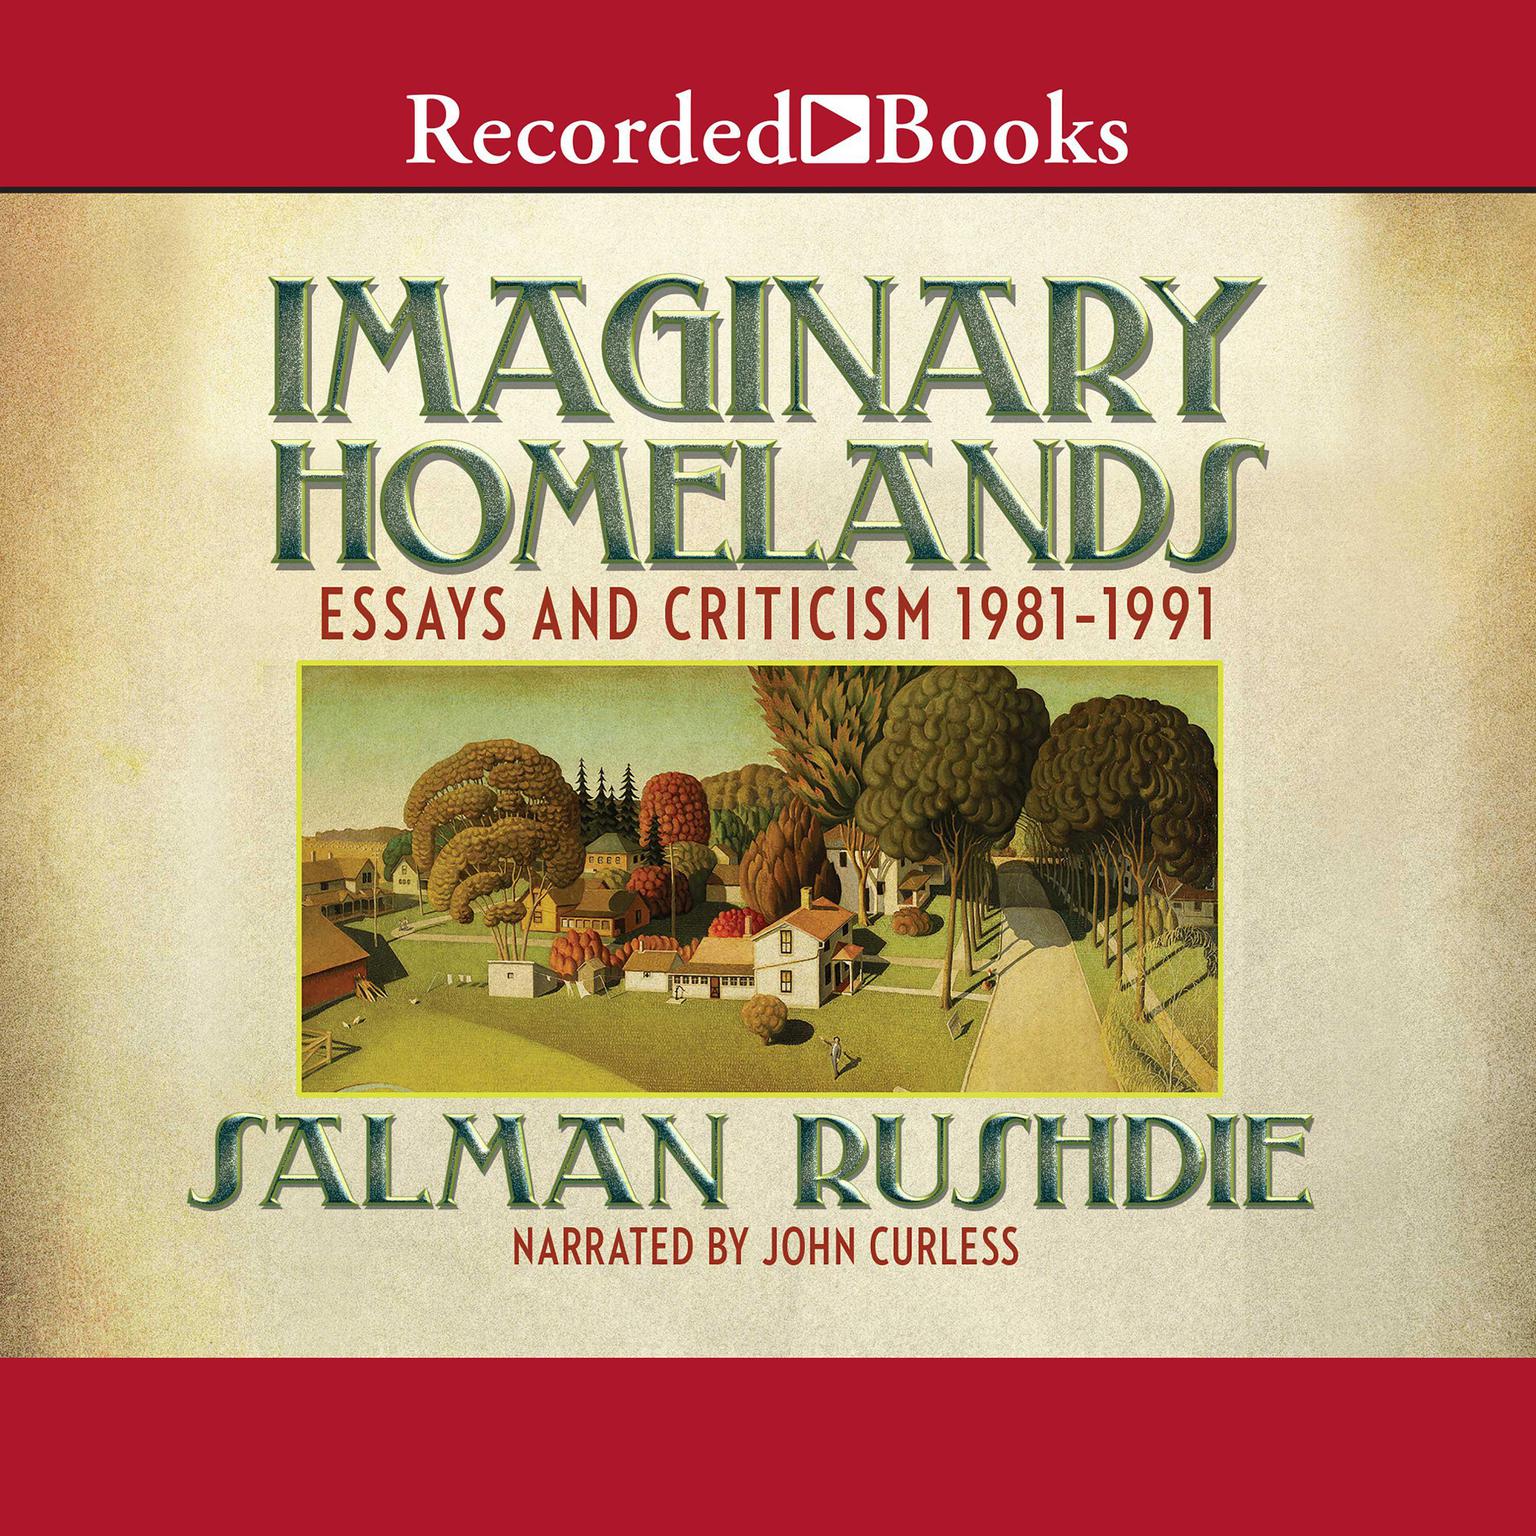 Imaginary Homelands: Essays and Criticicsm 1981-1991 Audiobook, by Salman Rushdie